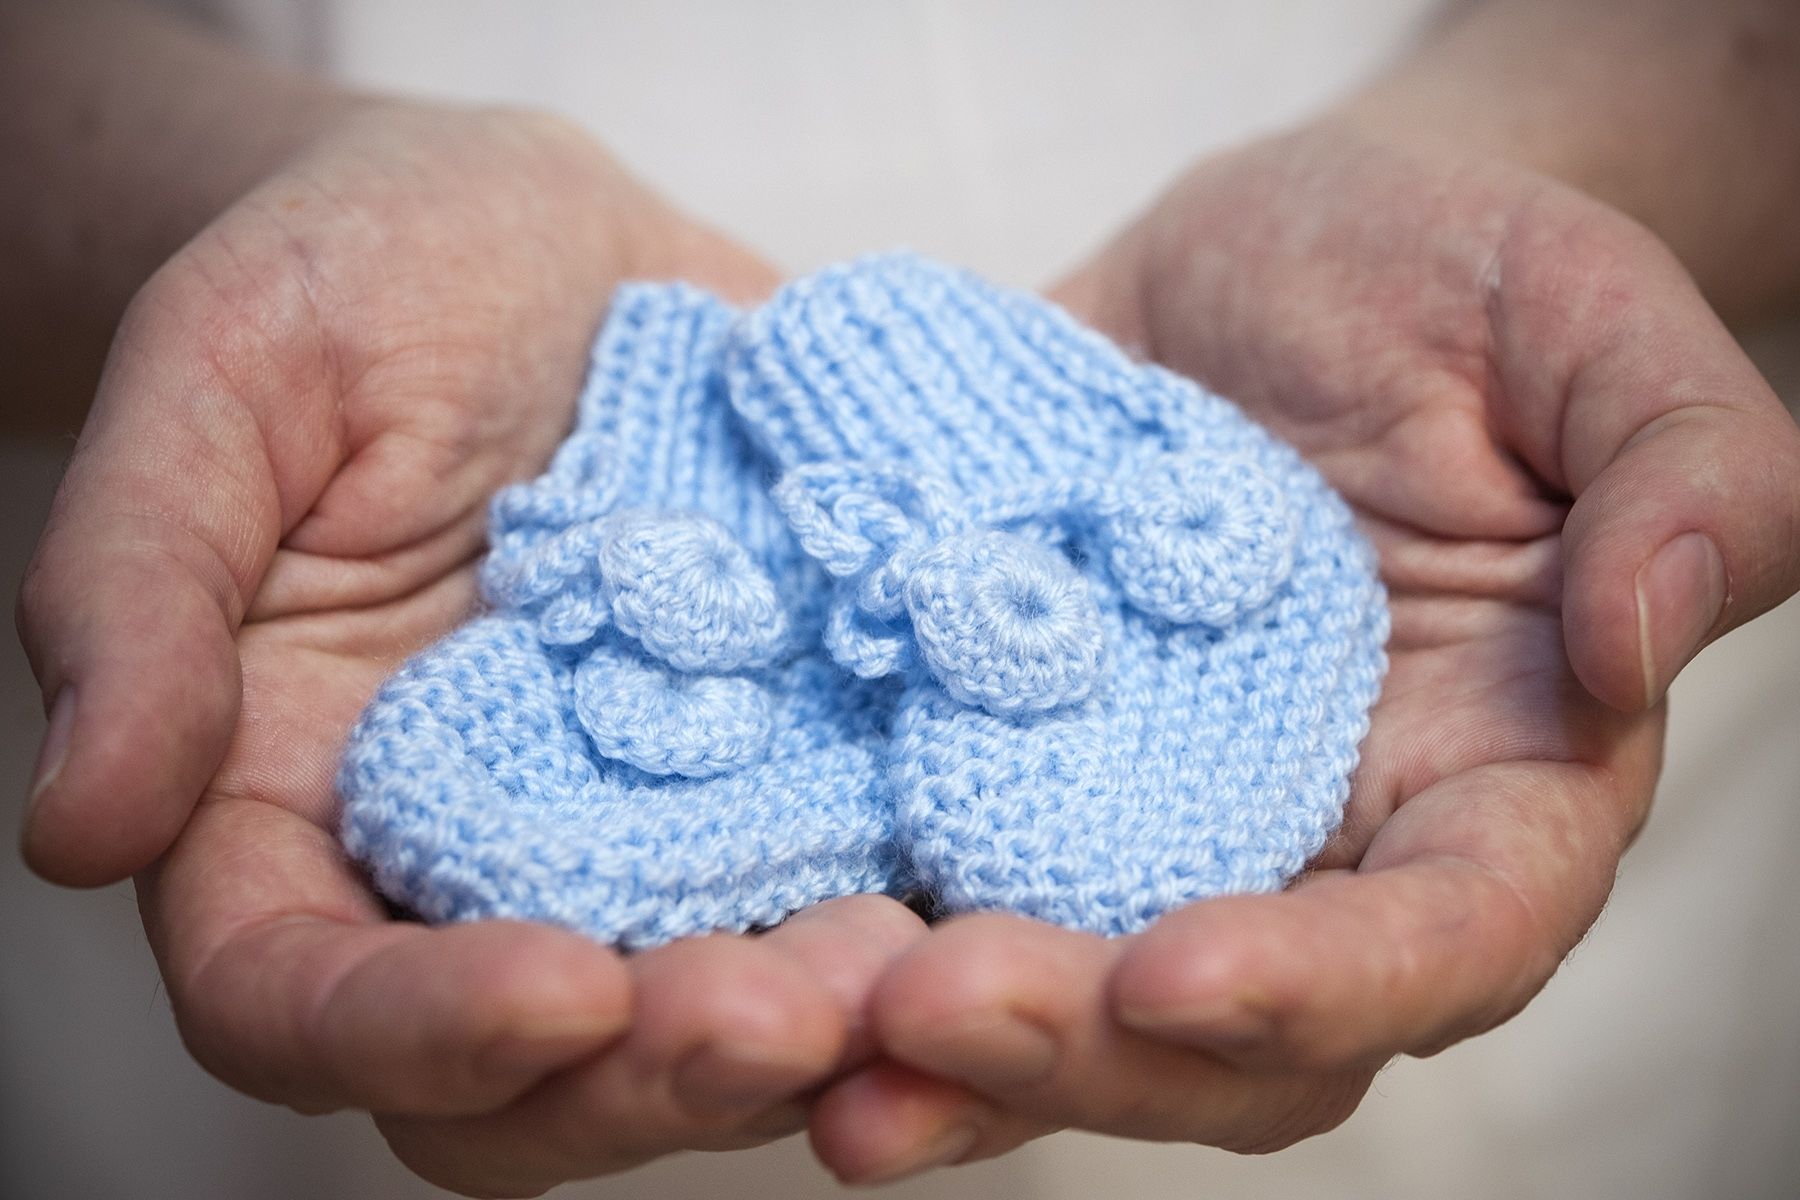 Along with a generous financial donation, members of the Sandra Schmirler Foundation brought a number of hand-knit booties and hats for premature babies in our NICU.